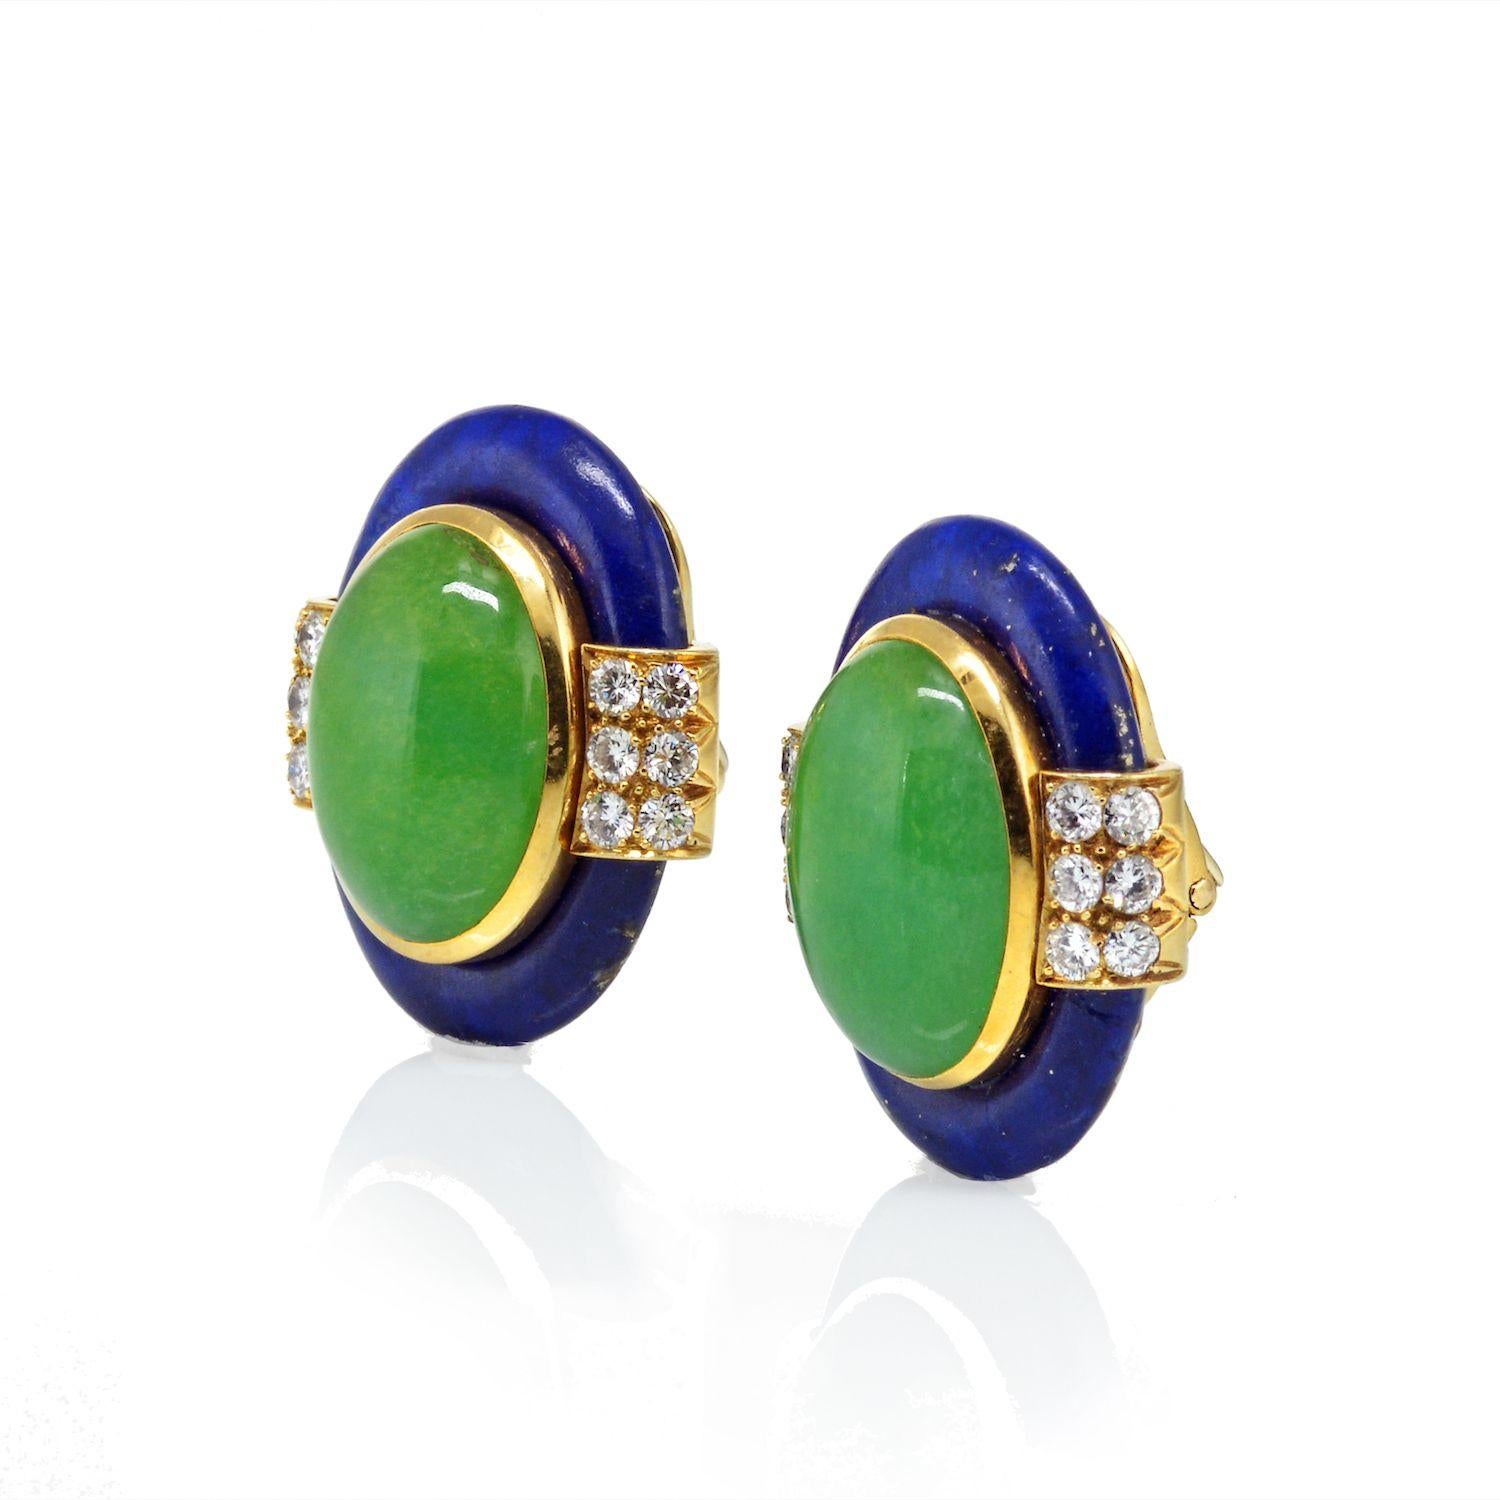 Lazulis, and Diamond Earrings. David Webb 18kt yellow gold earrings or ear clips with central oval cut jade cabochons flanked by three layers of round brilliant cut diamonds and a Lapis Lazulis surround. Jade measures approx. 20mm x 14.5mm. Stamped